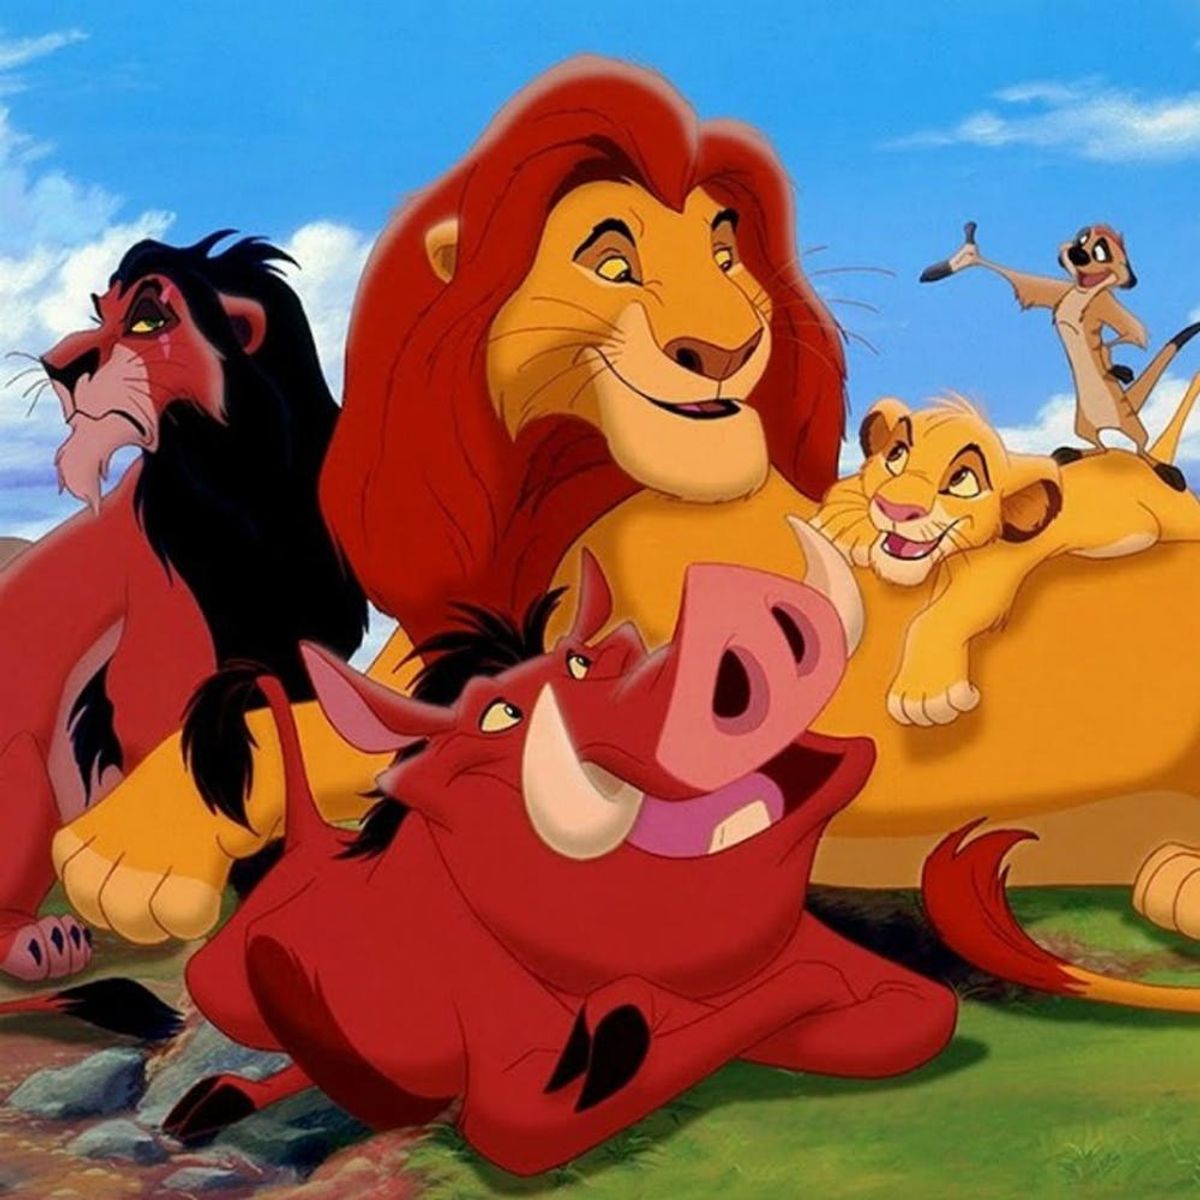 Fans Are Reacting to Reports Over Disney’s Lion King Footage